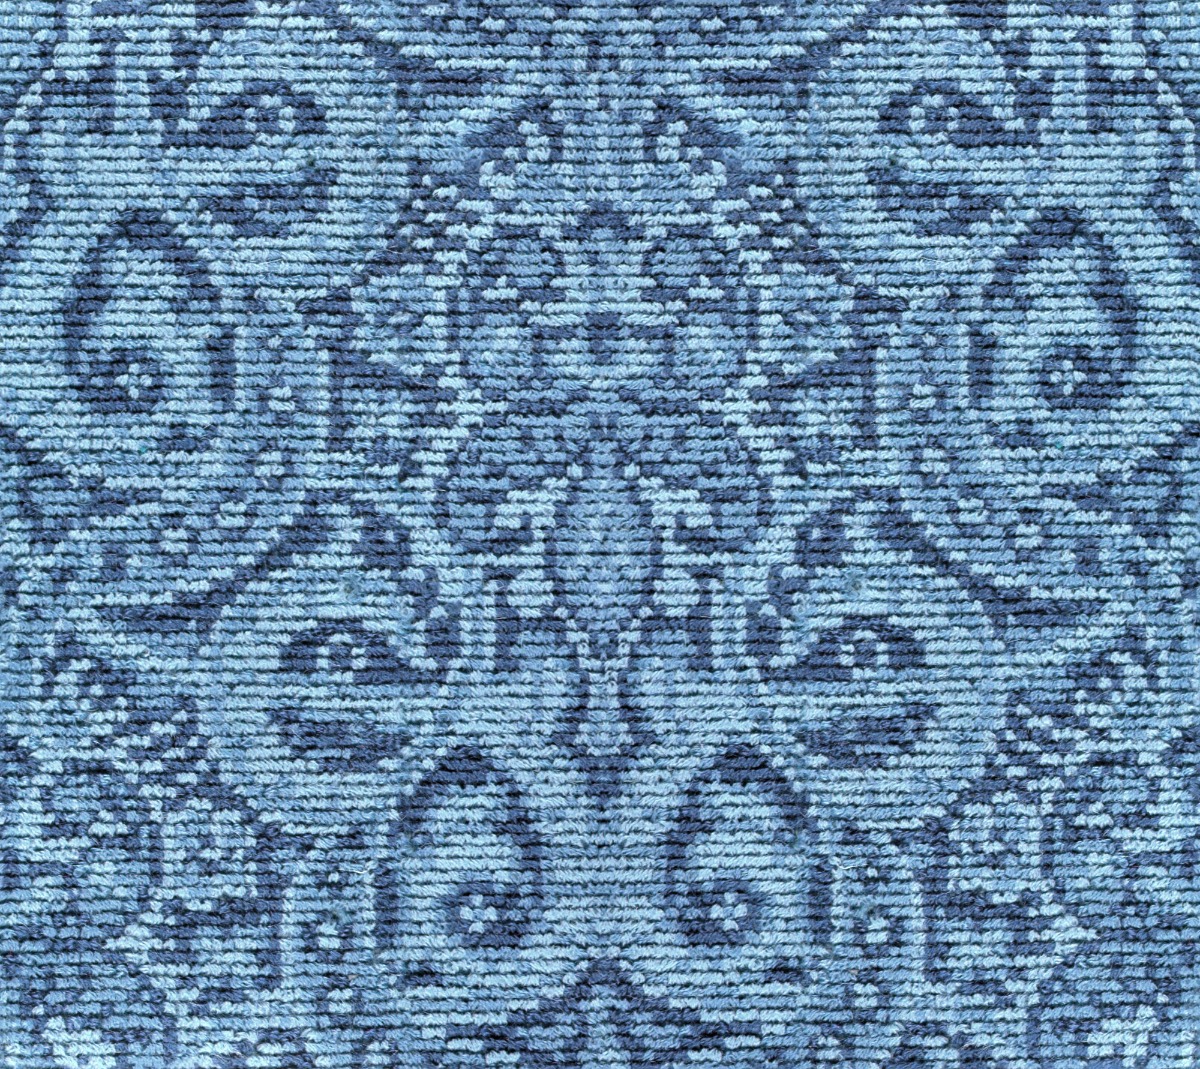 A seamless carpet texture with brussels carpet units arranged in a None pattern